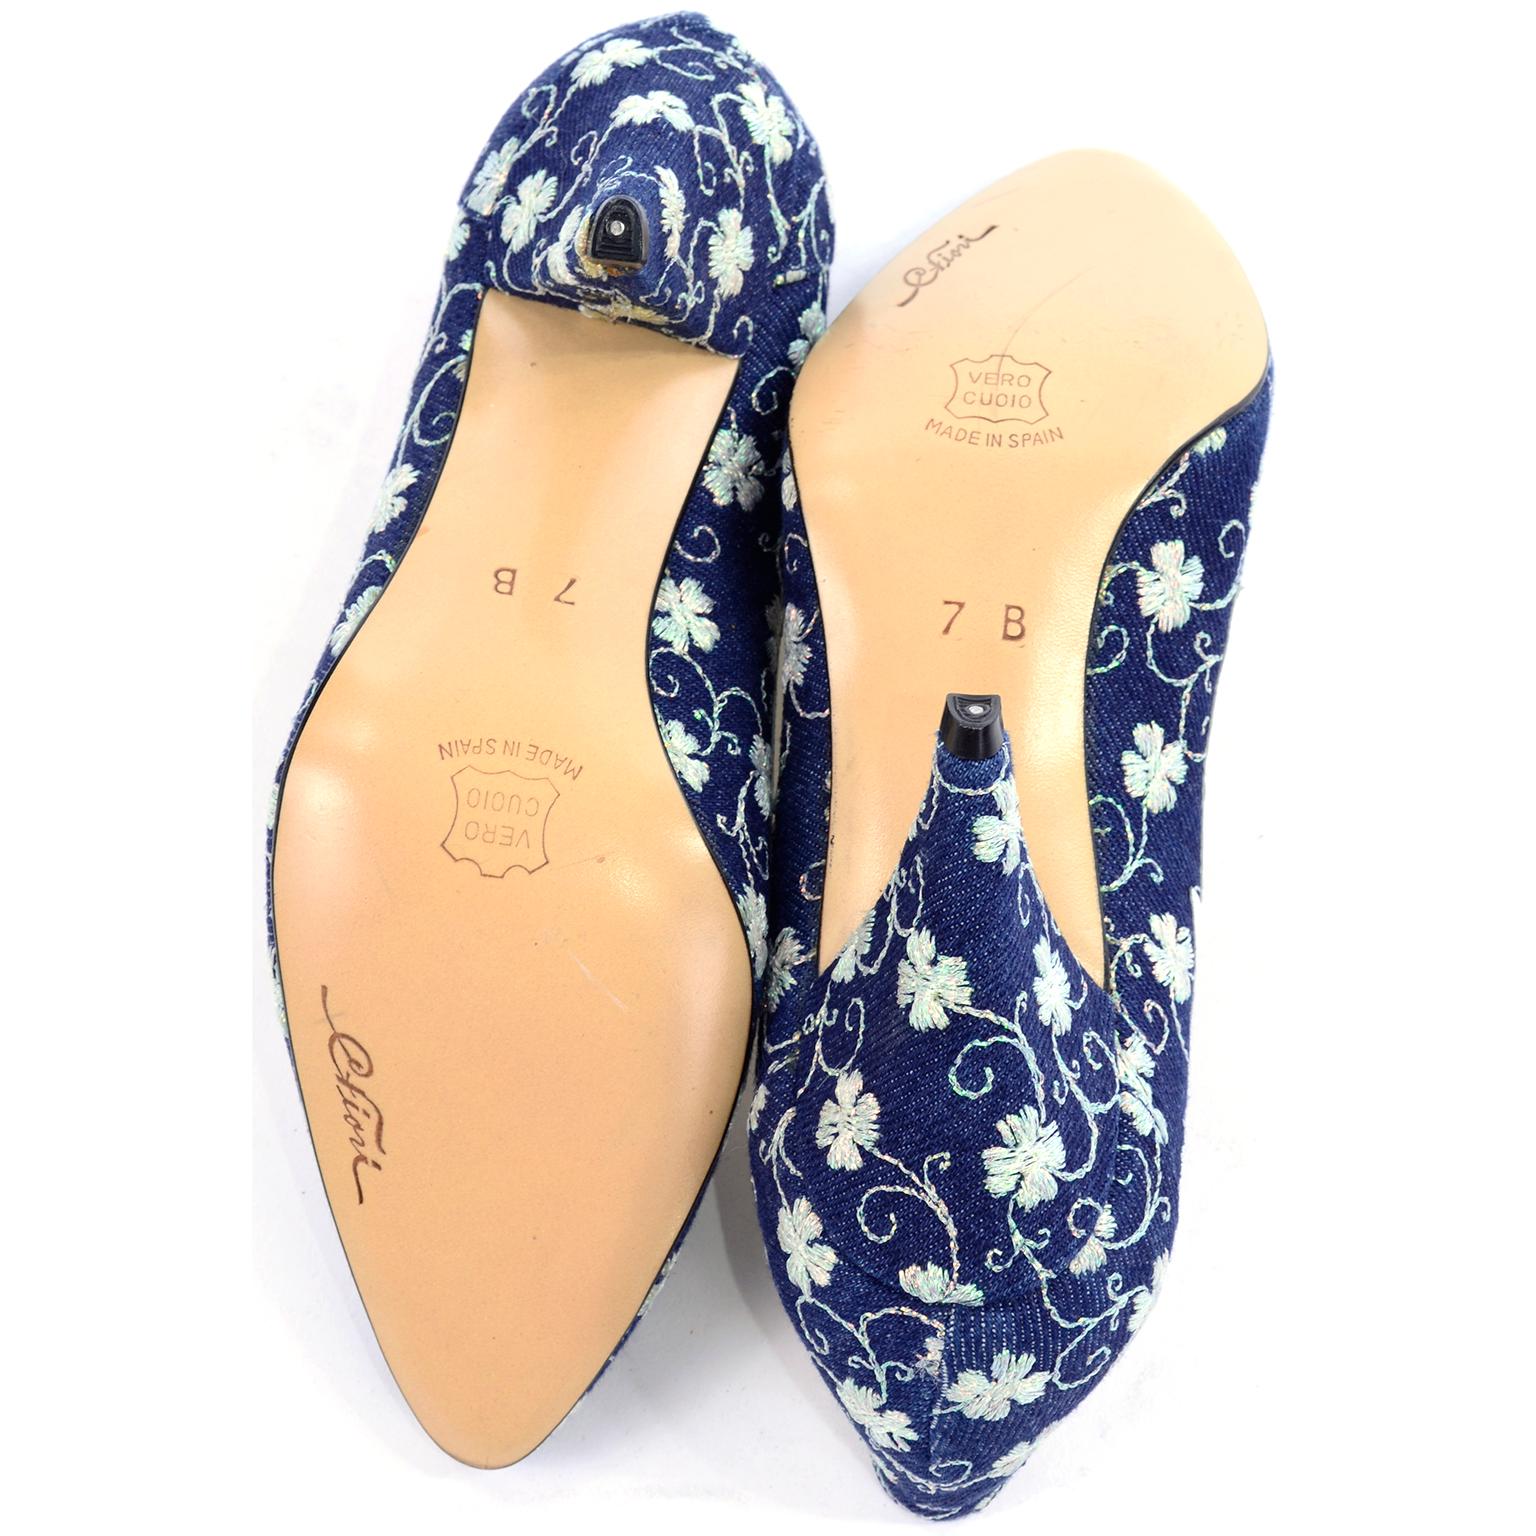 Deadstock Carlo Fiori Navy Blue & White Embroidered Shoes Unworn Size 7B 1